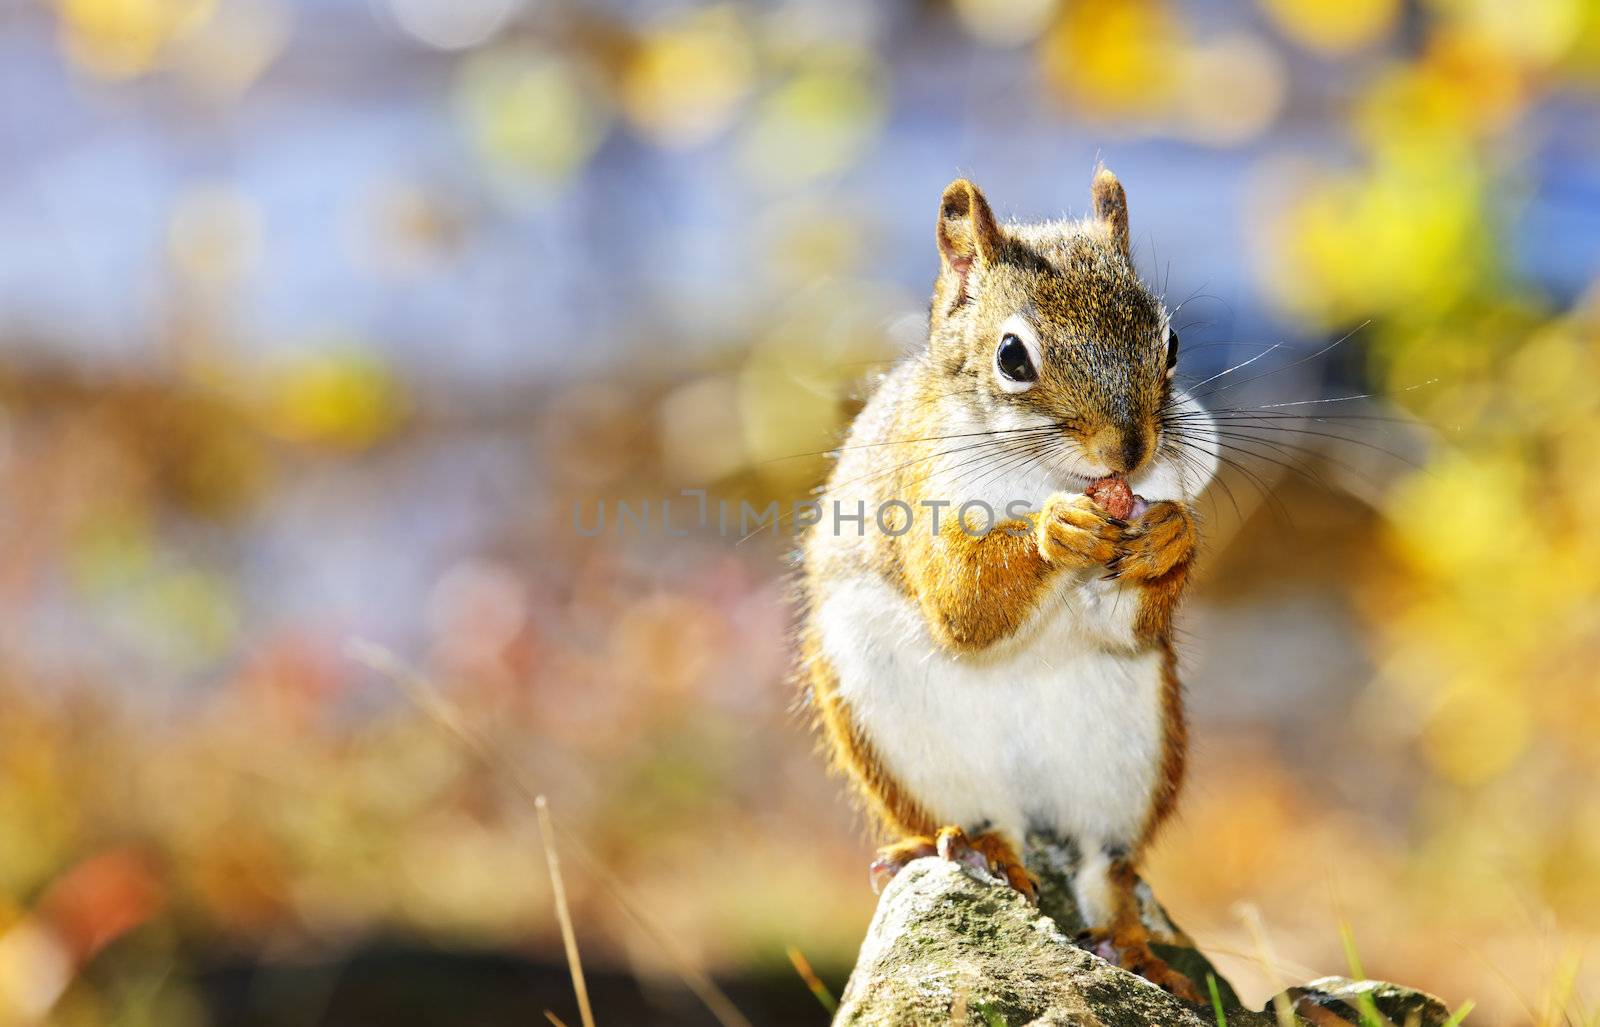 Cute red squirrel eating nut sitting on rock